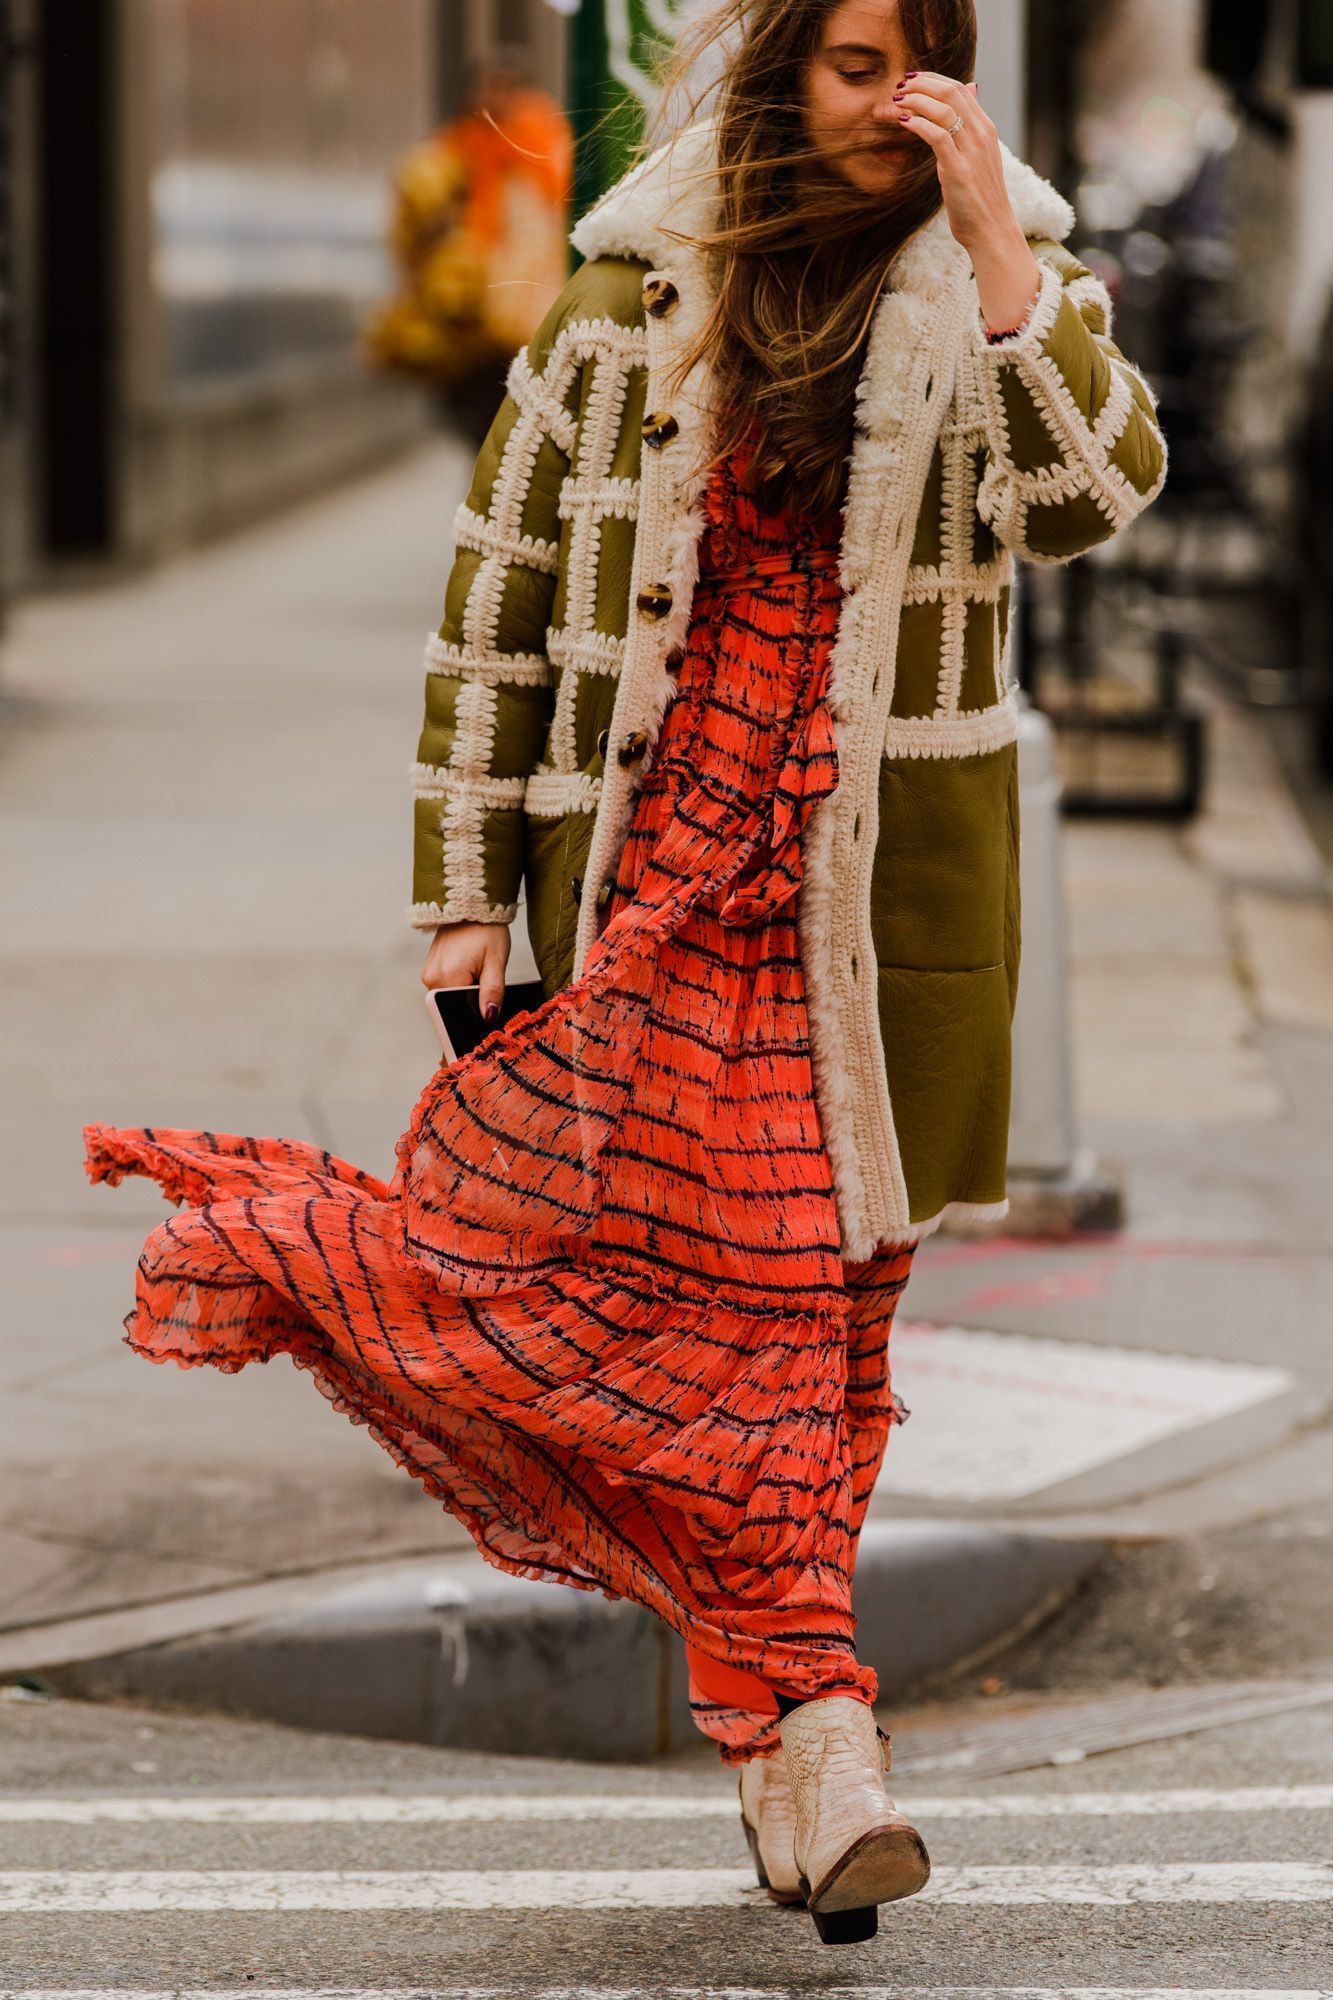 The Best Street Style from New York Fashion Week Fall 2020 . - The Best Street Style from New York Fashion Week Fall 2020 . -   18 style Fashion new york ideas